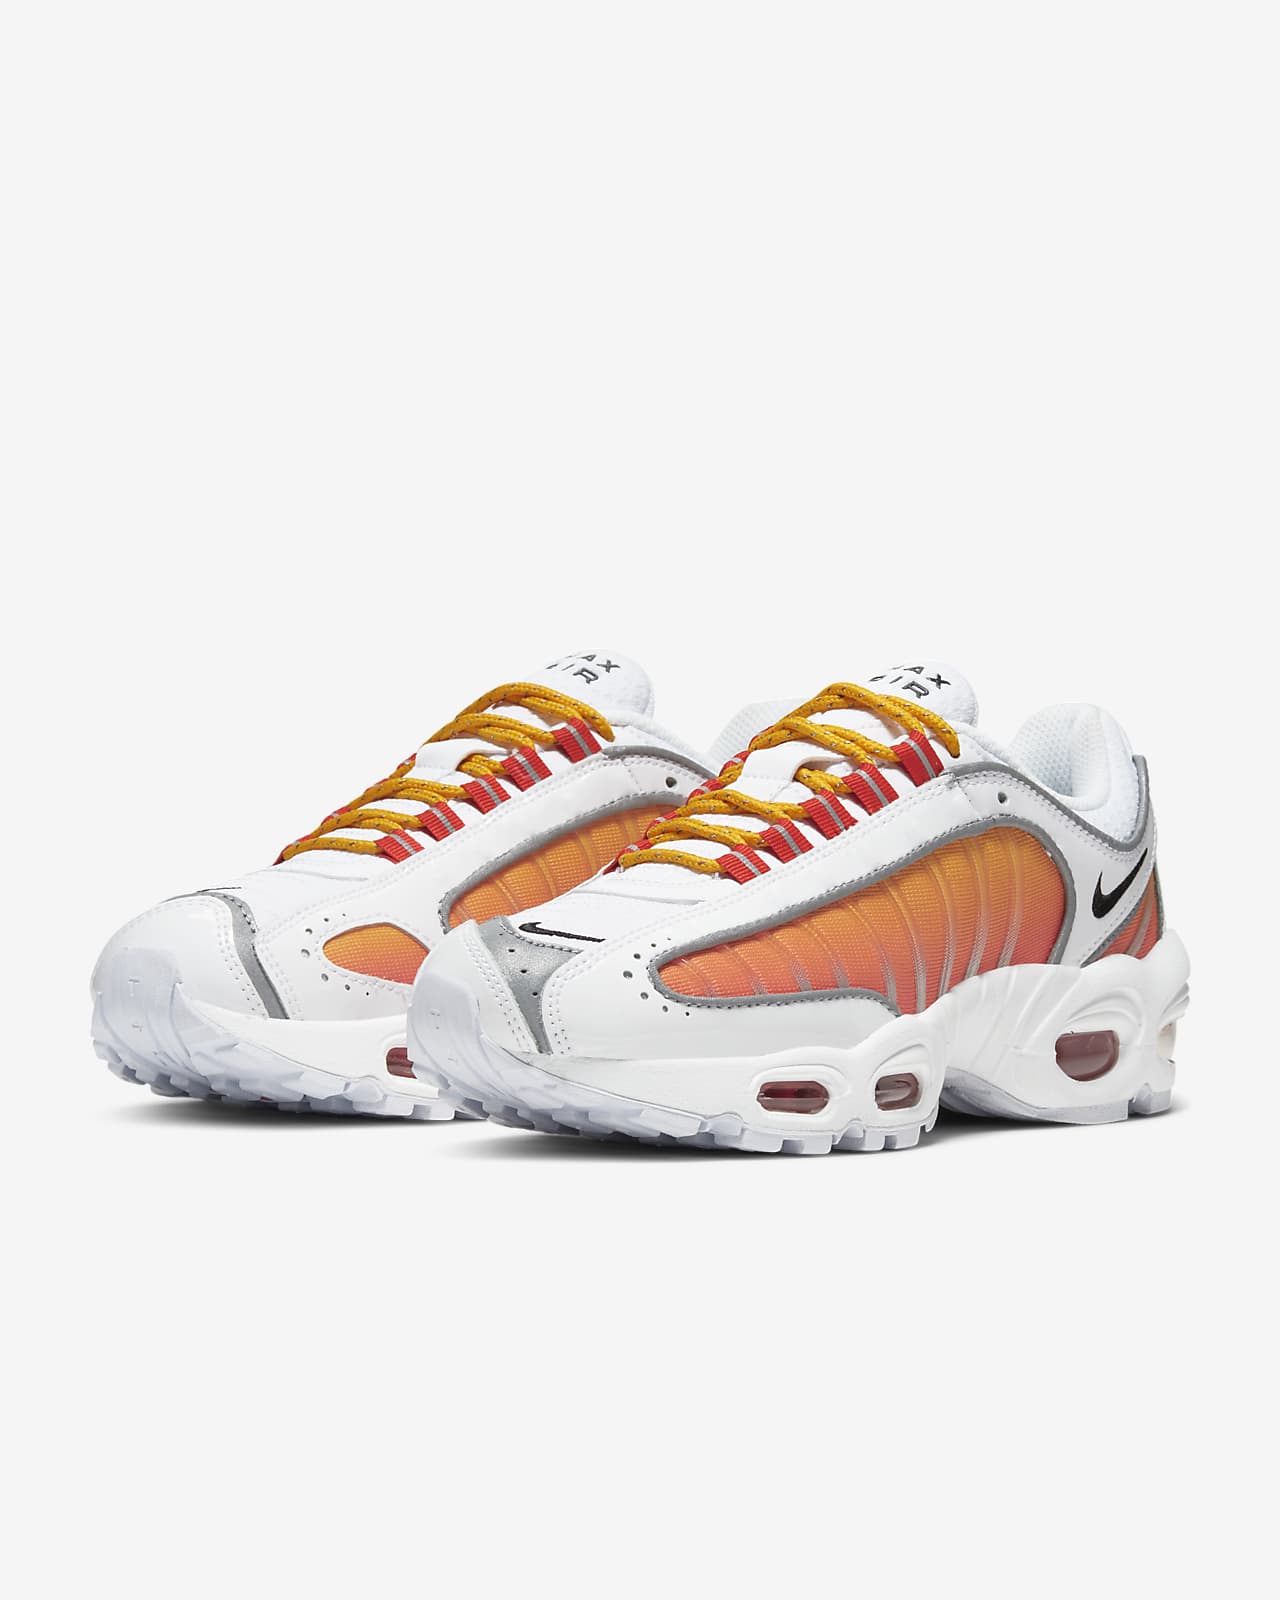 Chaussure Nike Air Max Tailwind IV pour 